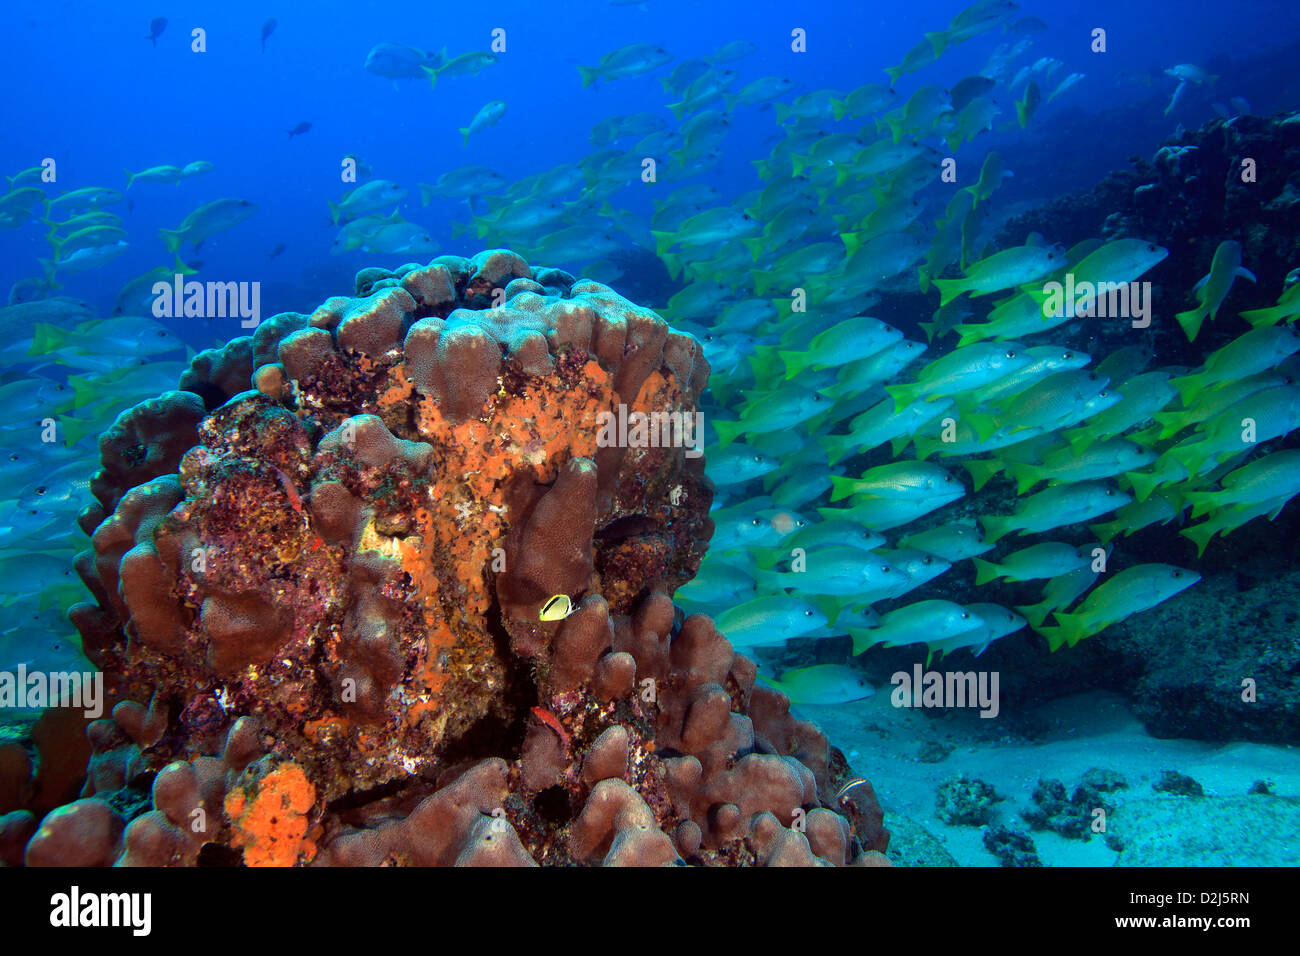 A school of yellowtail snapper underwater at Cabo Pulmo National Marine Park. Stock Photo